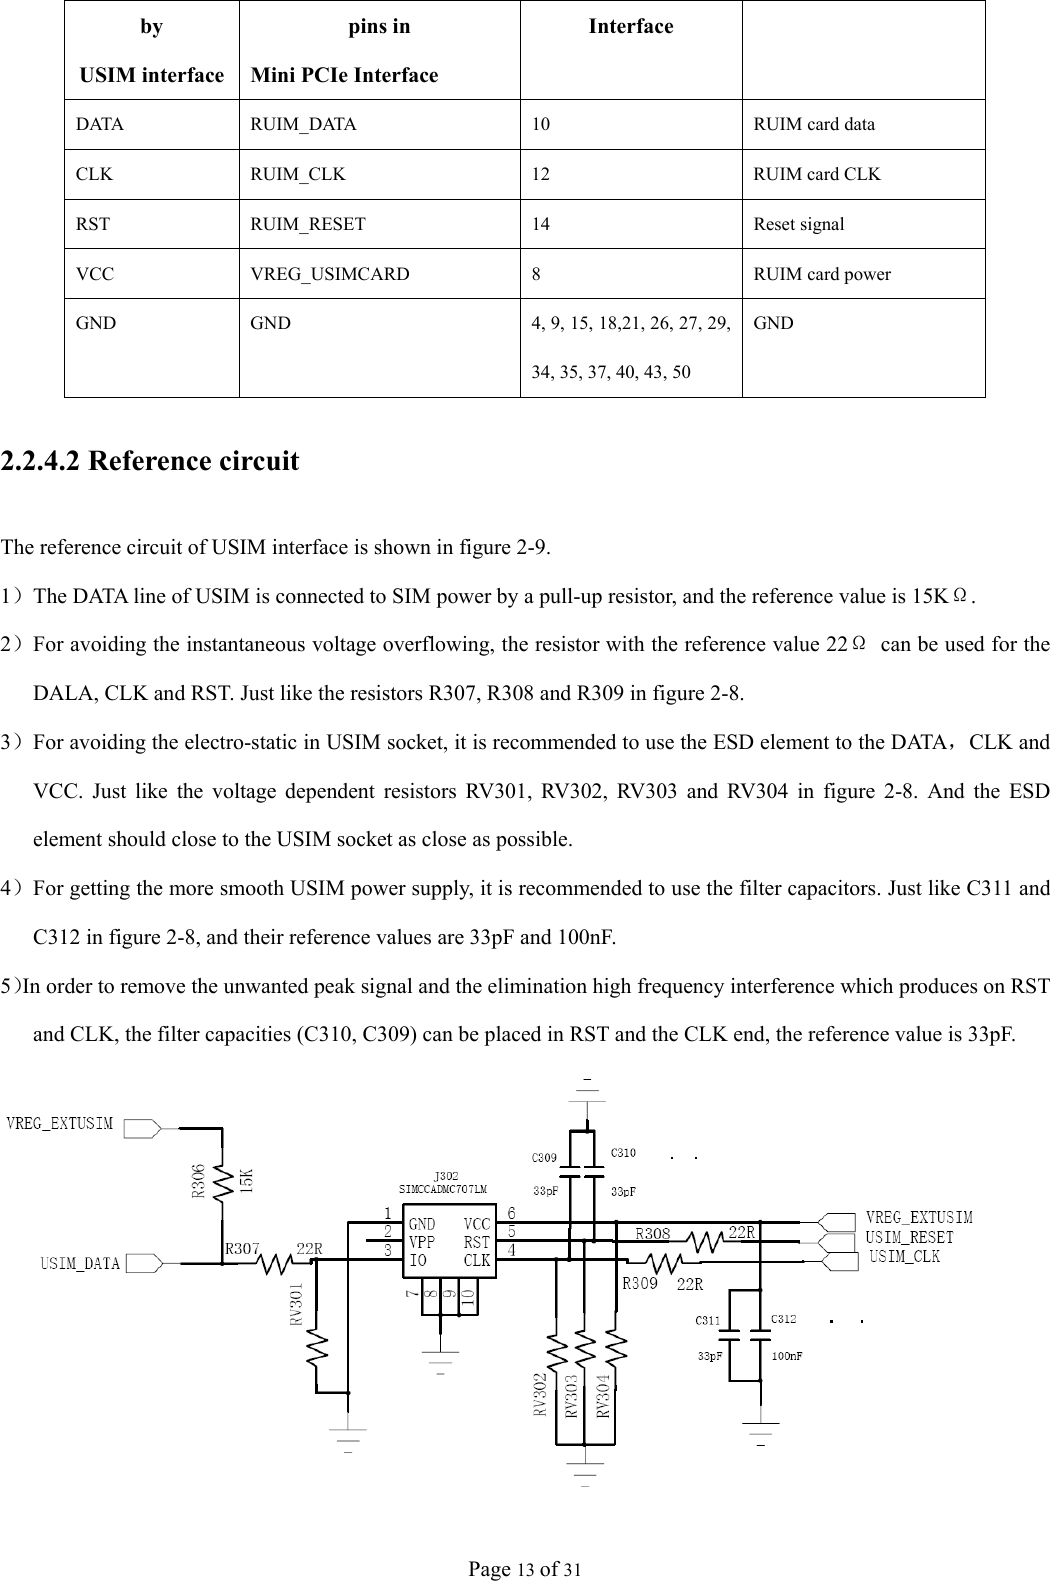 Page 13 of 31 by USIM interface pins in   Mini PCIe Interface Interface DATA  RUIM_DATA  10  RUIM card data CLK  RUIM_CLK  12  RUIM card CLK RST RUIM_RESET  14  Reset signal VCC  VREG_USIMCARD  8  RUIM card power GND  GND  4, 9, 15, 18,21, 26, 27, 29, 34, 35, 37, 40, 43, 50 GND 2.2.4.2 Reference circuit The reference circuit of USIM interface is shown in figure 2-9. 1）The DATA line of USIM is connected to SIM power by a pull-up resistor, and the reference value is 15KΩ. 2）For avoiding the instantaneous voltage overflowing, the resistor with the reference value 22Ω  can be used for the DALA, CLK and RST. Just like the resistors R307, R308 and R309 in figure 2-8. 3）For avoiding the electro-static in USIM socket, it is recommended to use the ESD element to the DATA，CLK and VCC. Just like the voltage dependent resistors RV301, RV302, RV303 and RV304 in figure 2-8. And the ESD element should close to the USIM socket as close as possible. 4）For getting the more smooth USIM power supply, it is recommended to use the filter capacitors. Just like C311 and C312 in figure 2-8, and their reference values are 33pF and 100nF. 5）In order to remove the unwanted peak signal and the elimination high frequency interference which produces on RST and CLK, the filter capacities (C310, C309) can be placed in RST and the CLK end, the reference value is 33pF.  